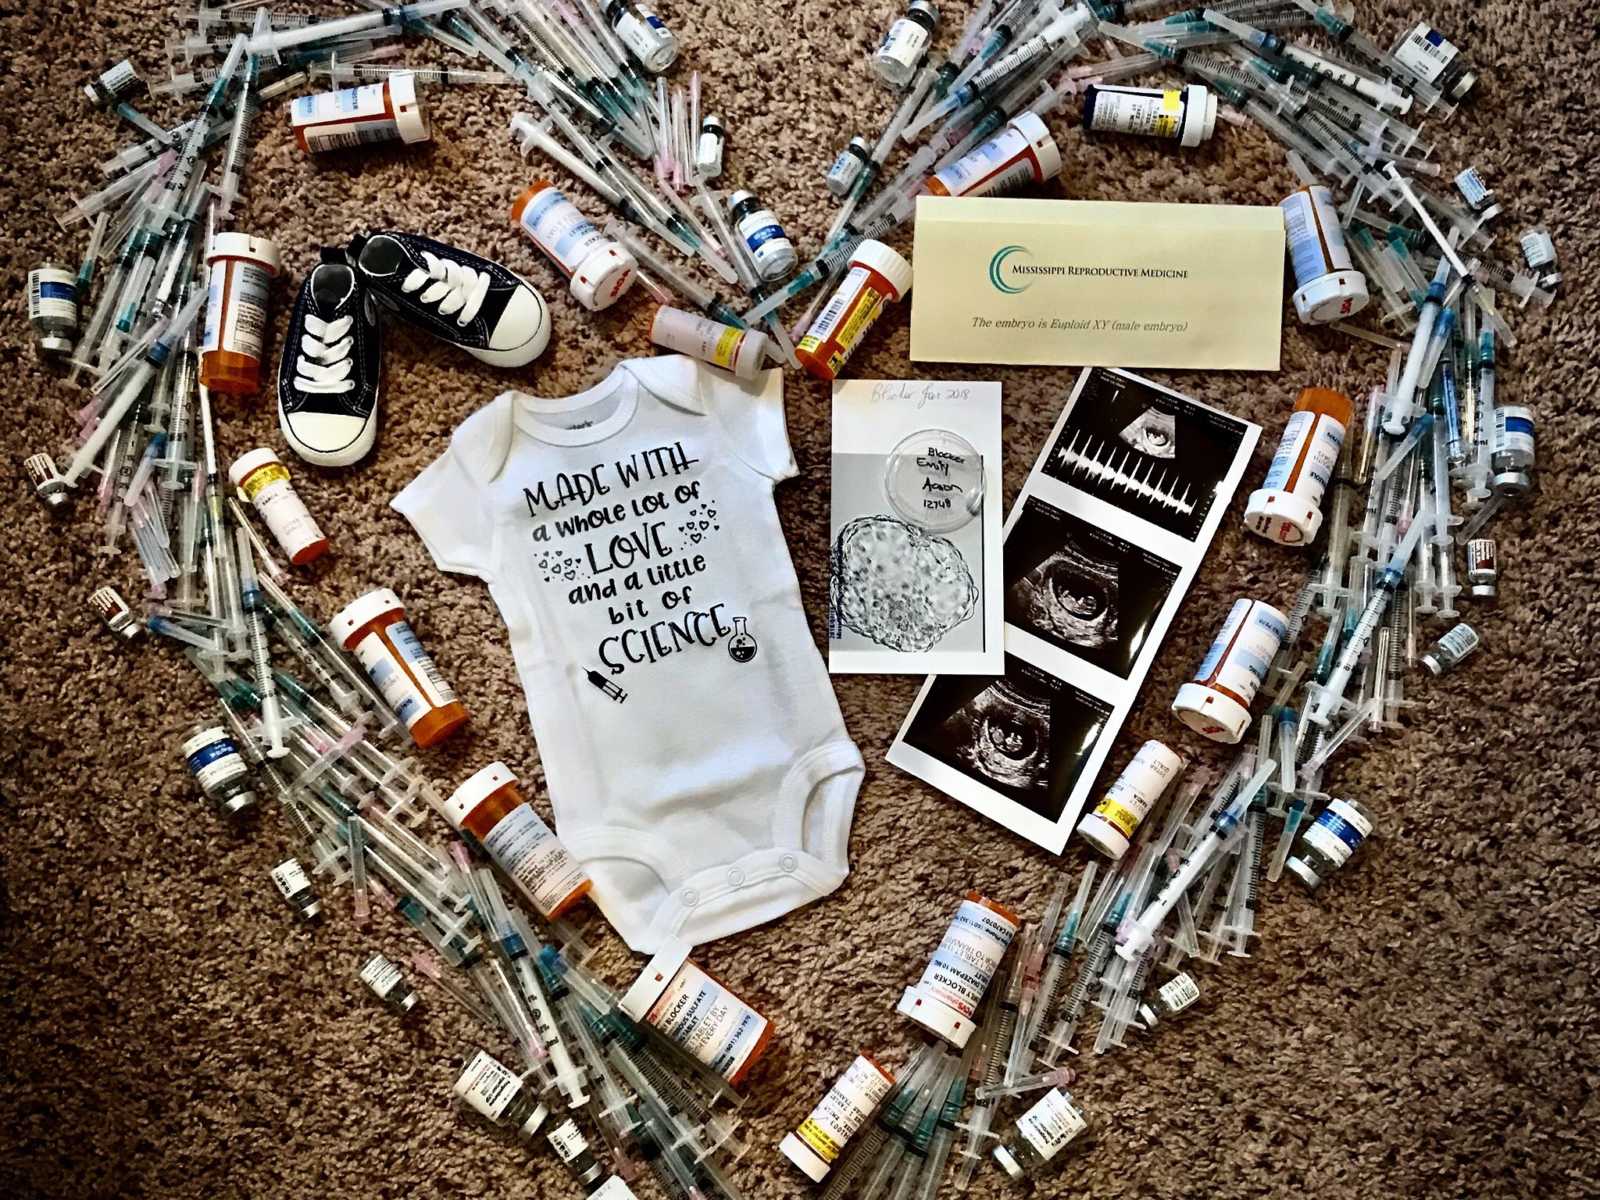 IVF needles and medication in shape of heart enclosing baby onesie, baby shoes, and ultrasound